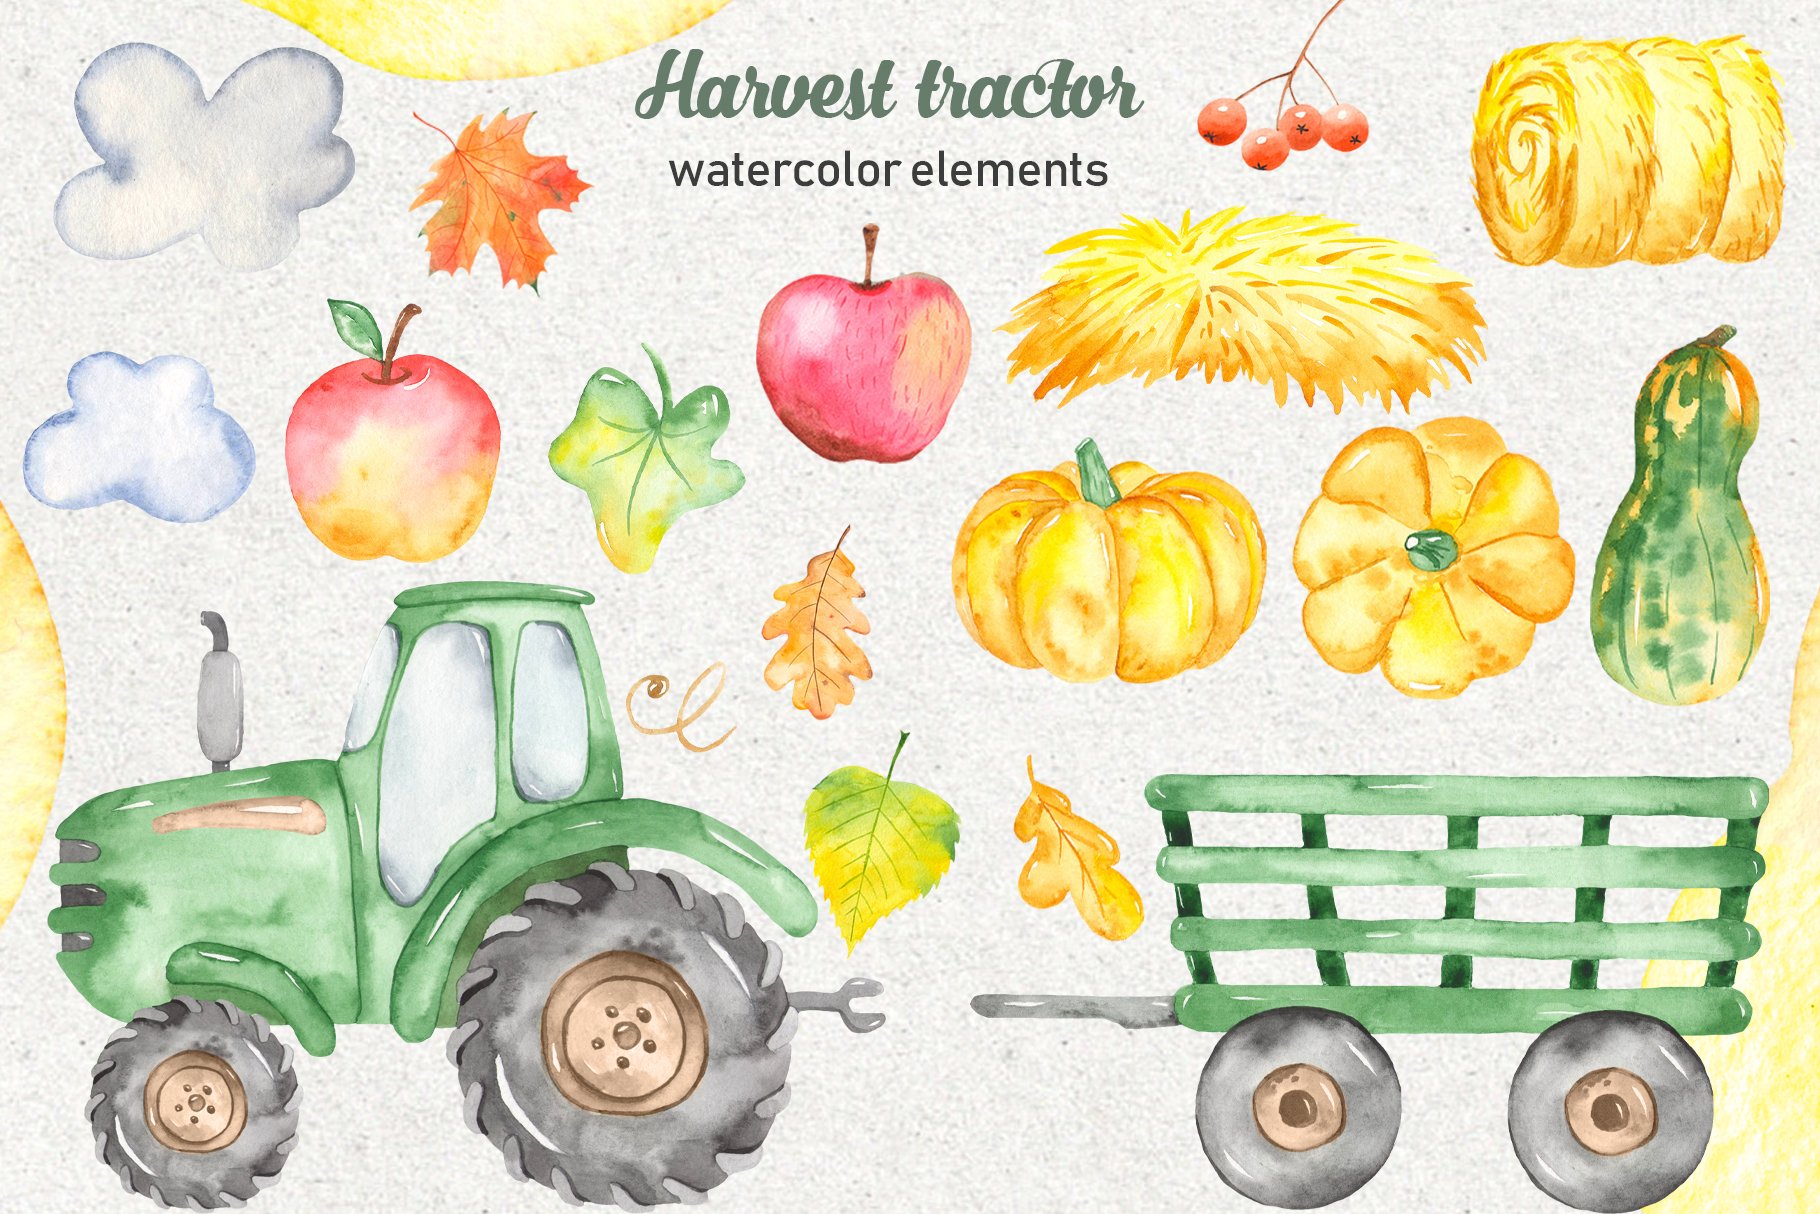 Cool green tractor with yellow pumpkins and red apples.